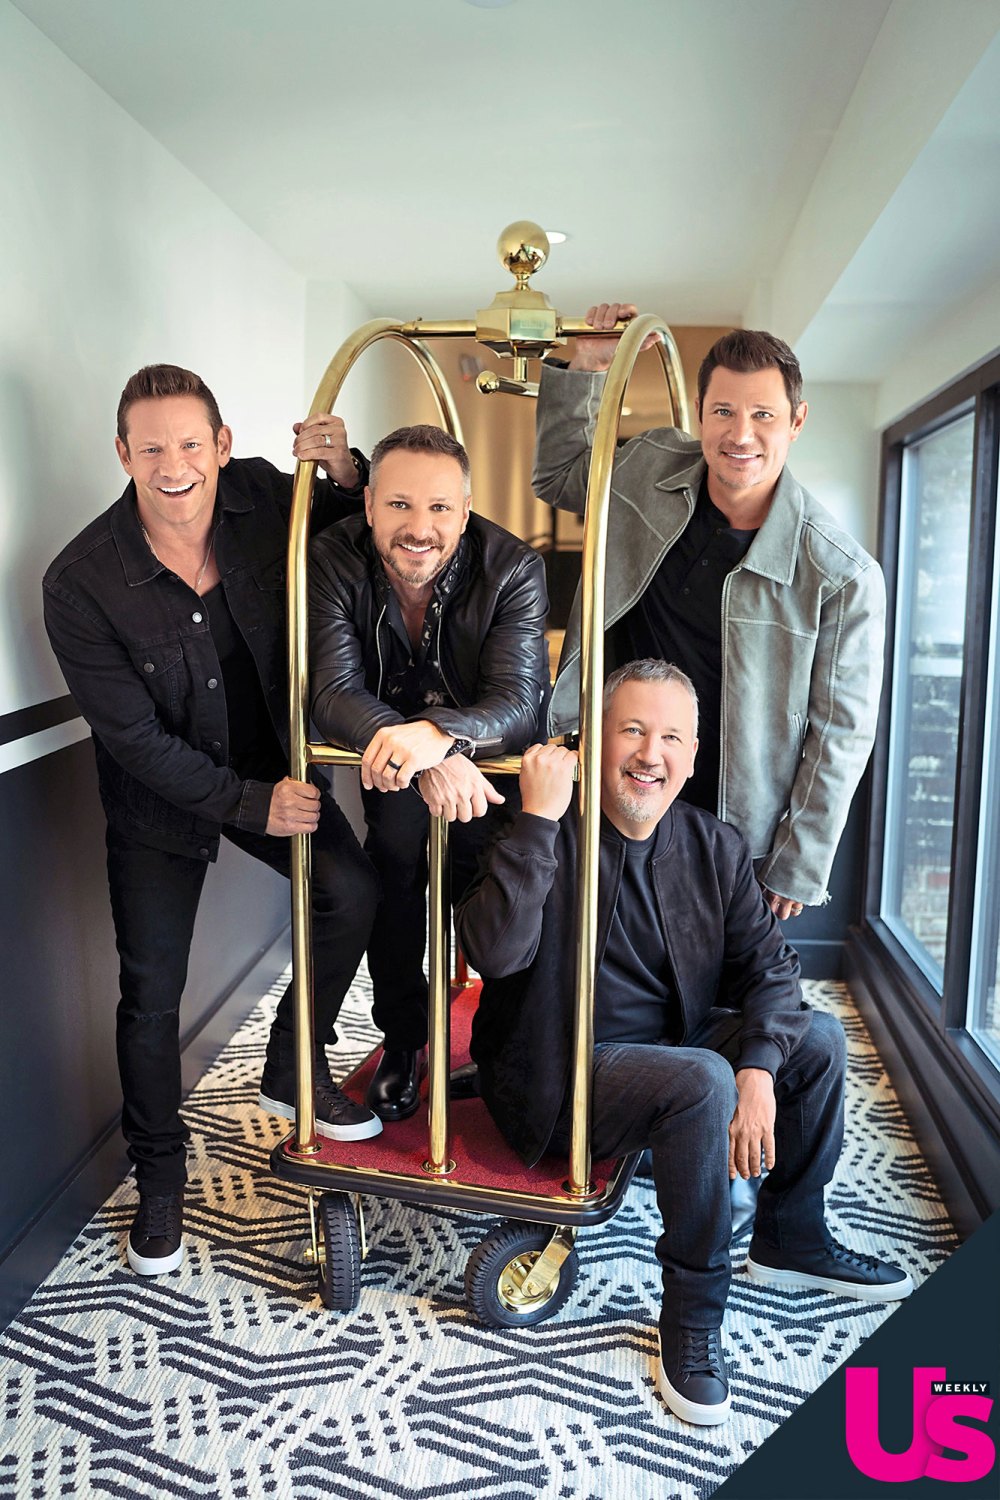 98 Degrees on New Music, Touring, '90s Fashion and Boy Band Mania